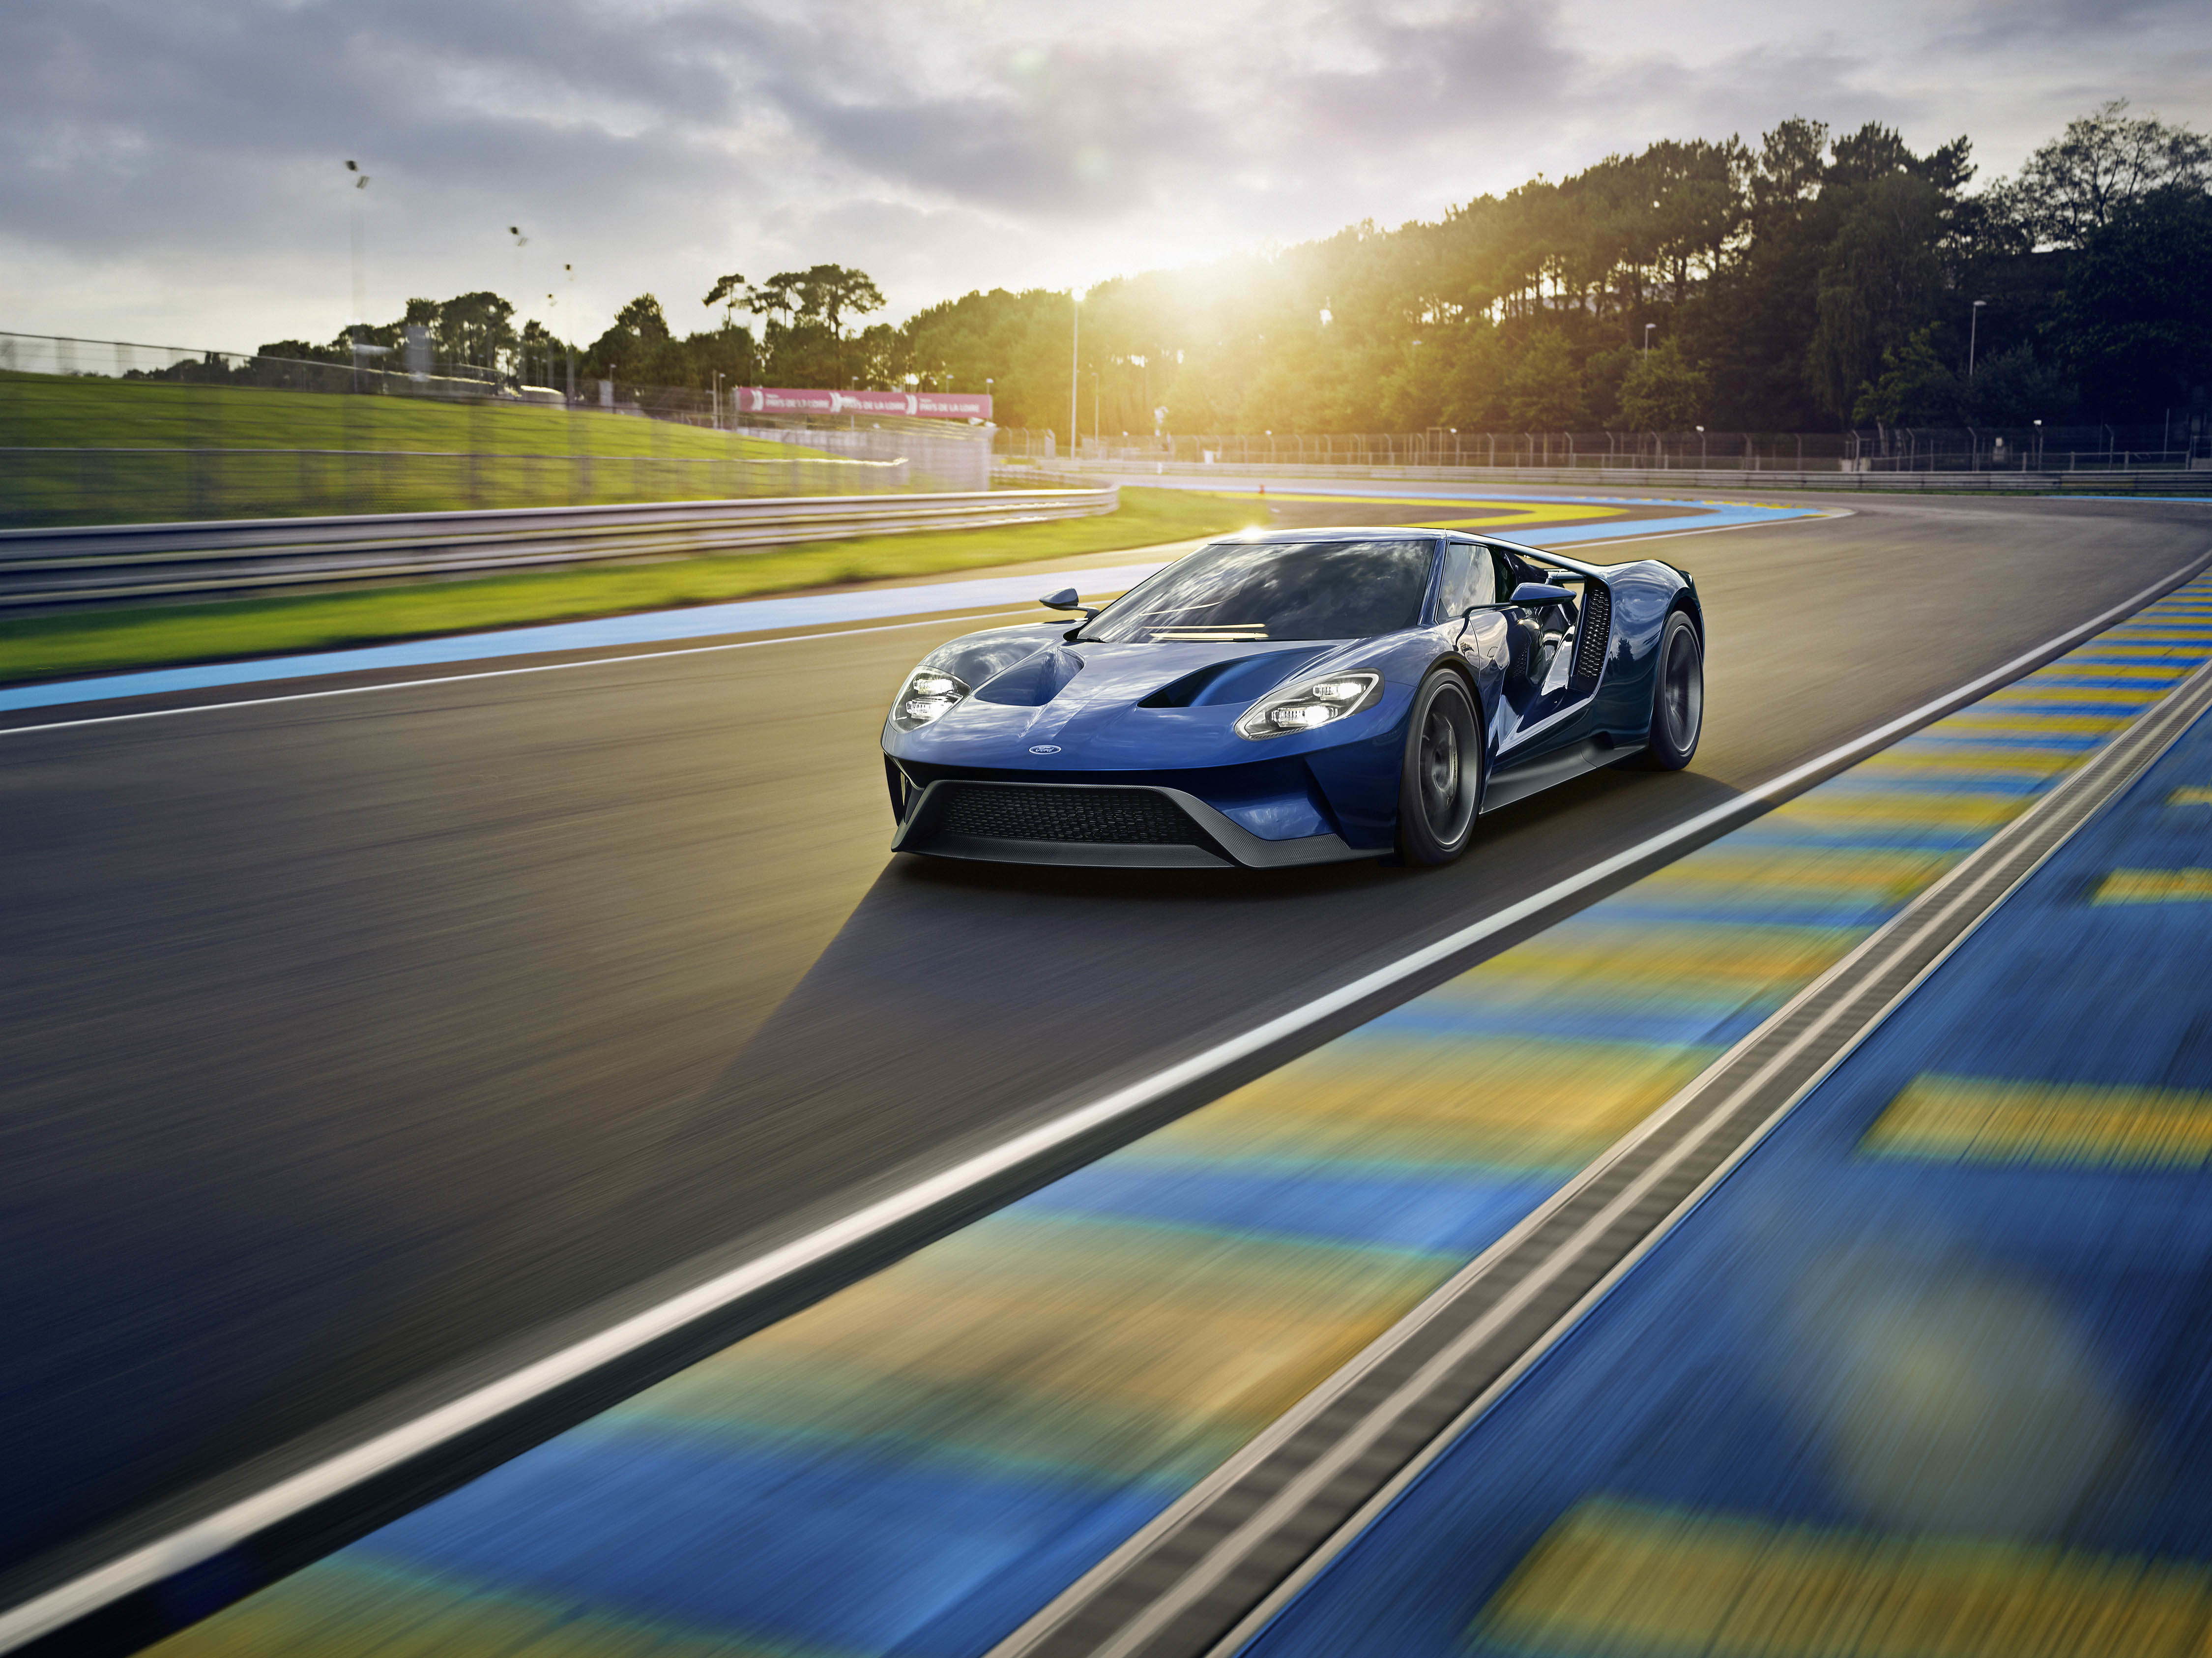 Horizontal Wallpaper sports, ford, cars, sports car, gt, track, route